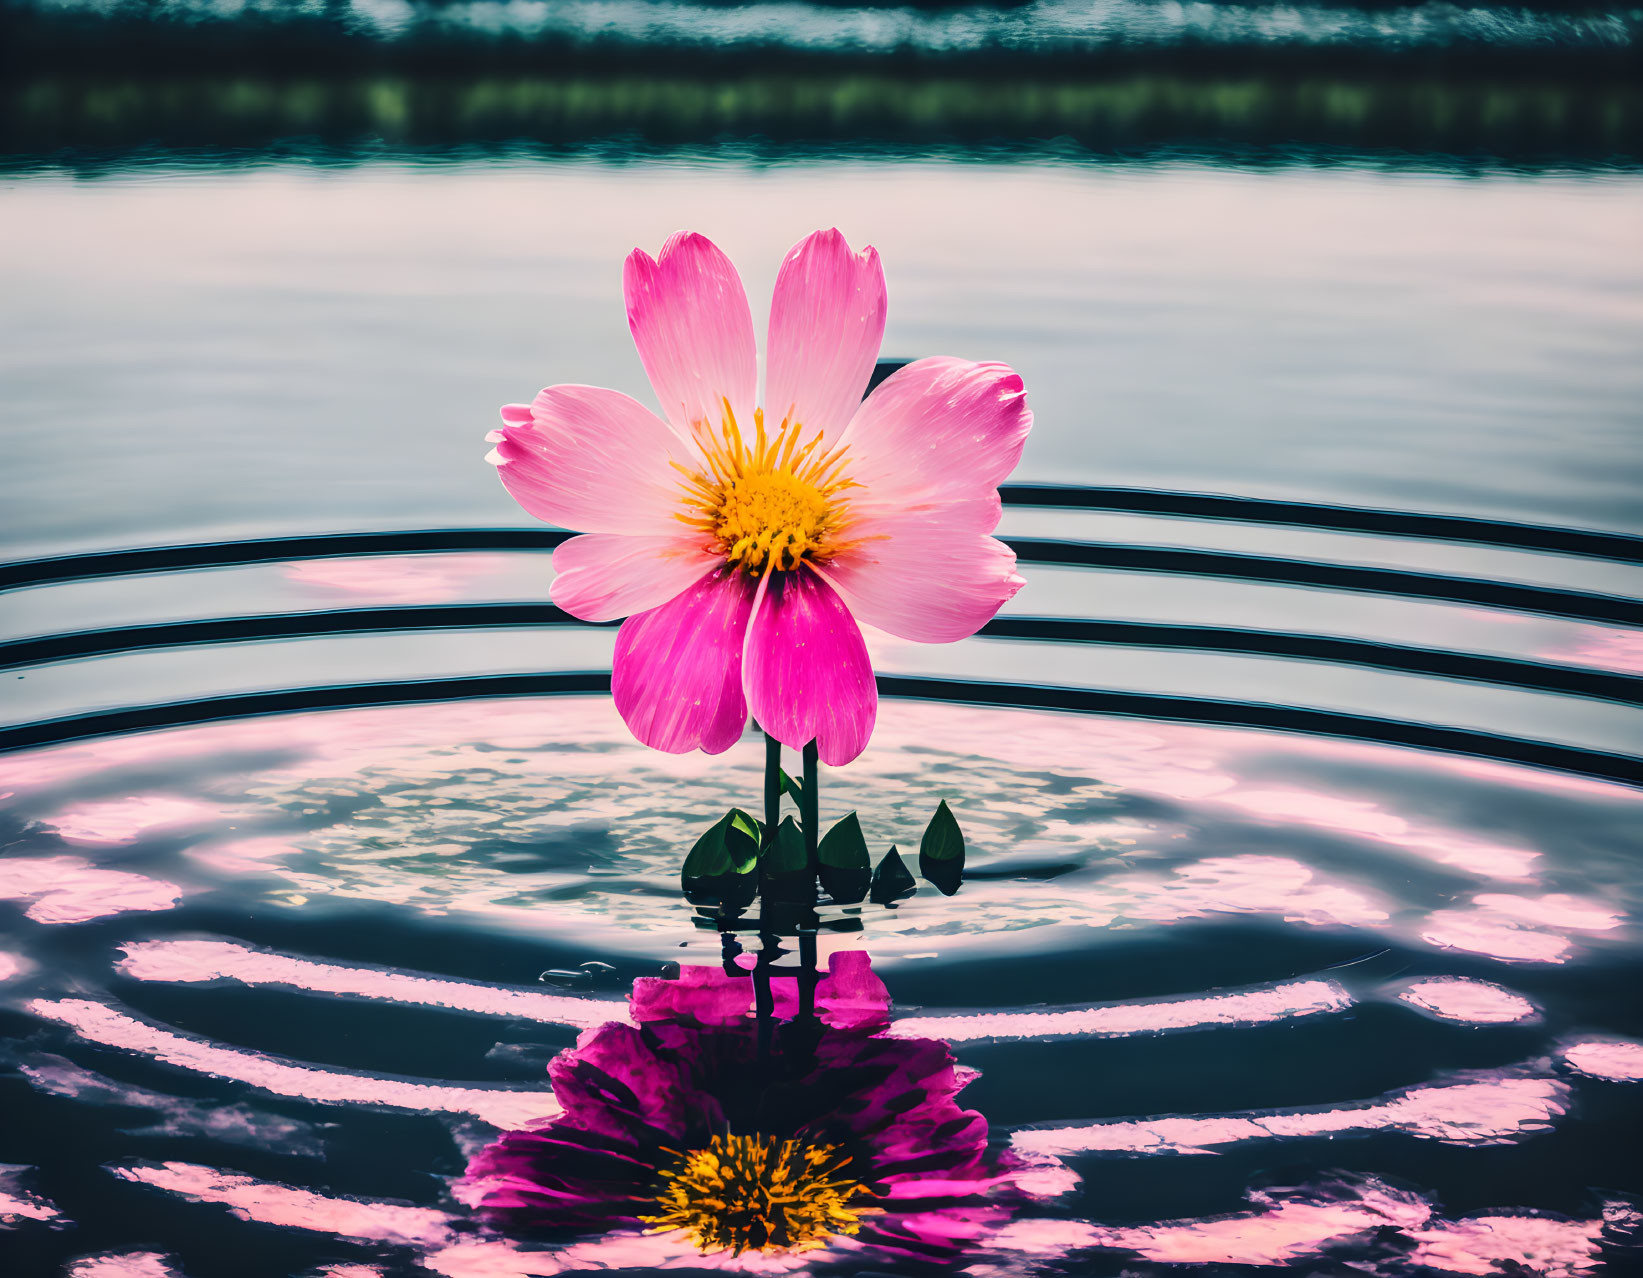 Flower in middle of lake